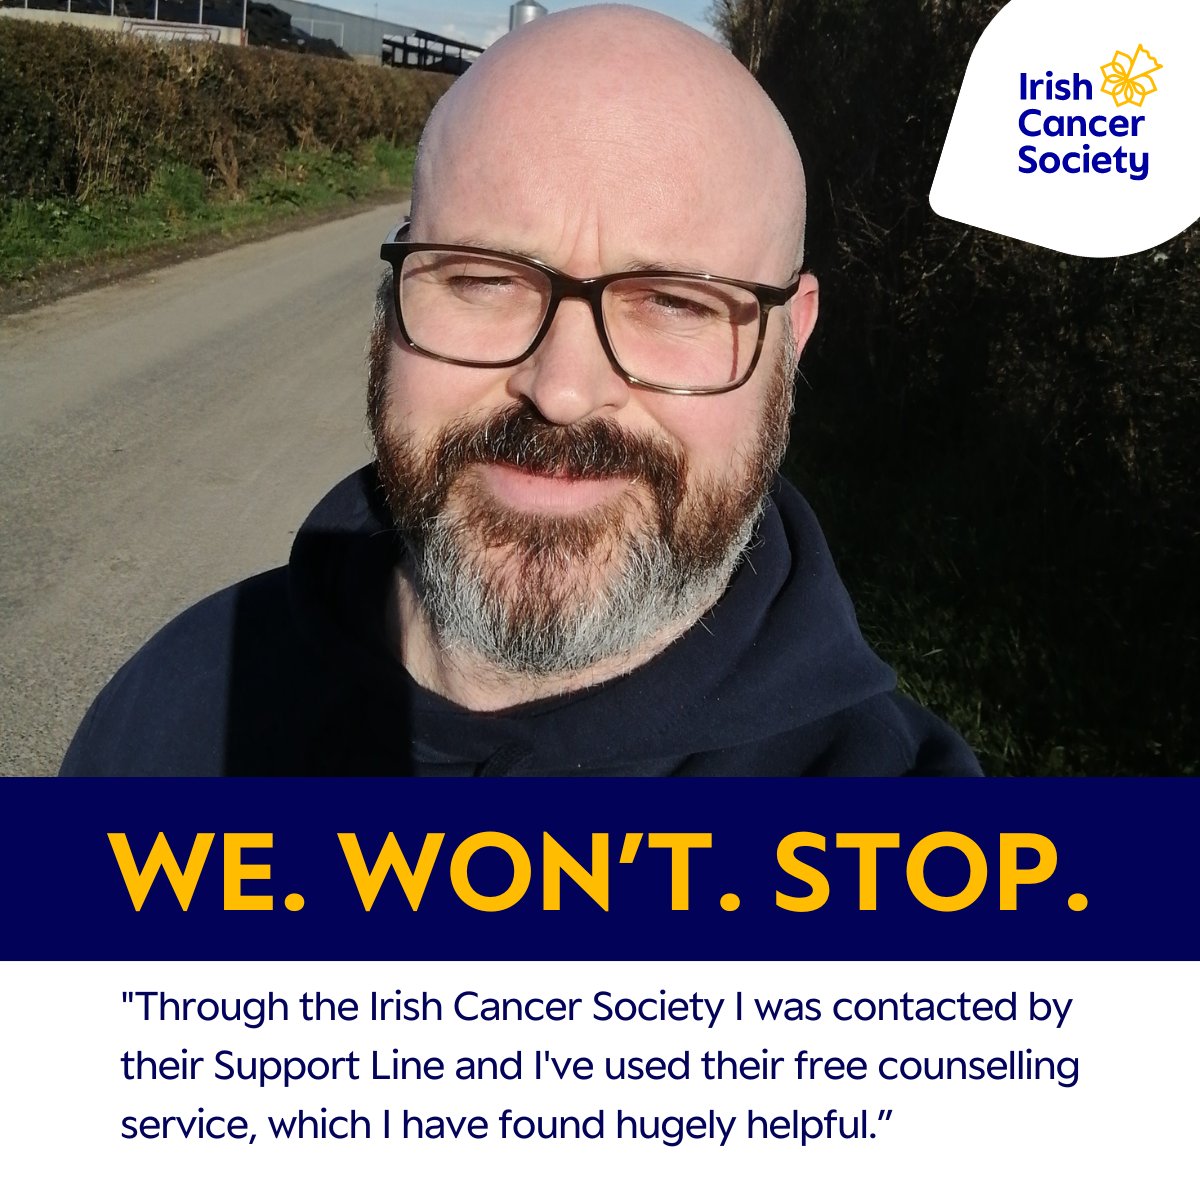 'Even if just one person reads my story and says okay, my next birthday, I’m getting a check-up, that would make it worth it' Adam is sharing his story to encourage men of all ages to take their health seriously. Read more of Adam's story at cancer.ie/yourstories